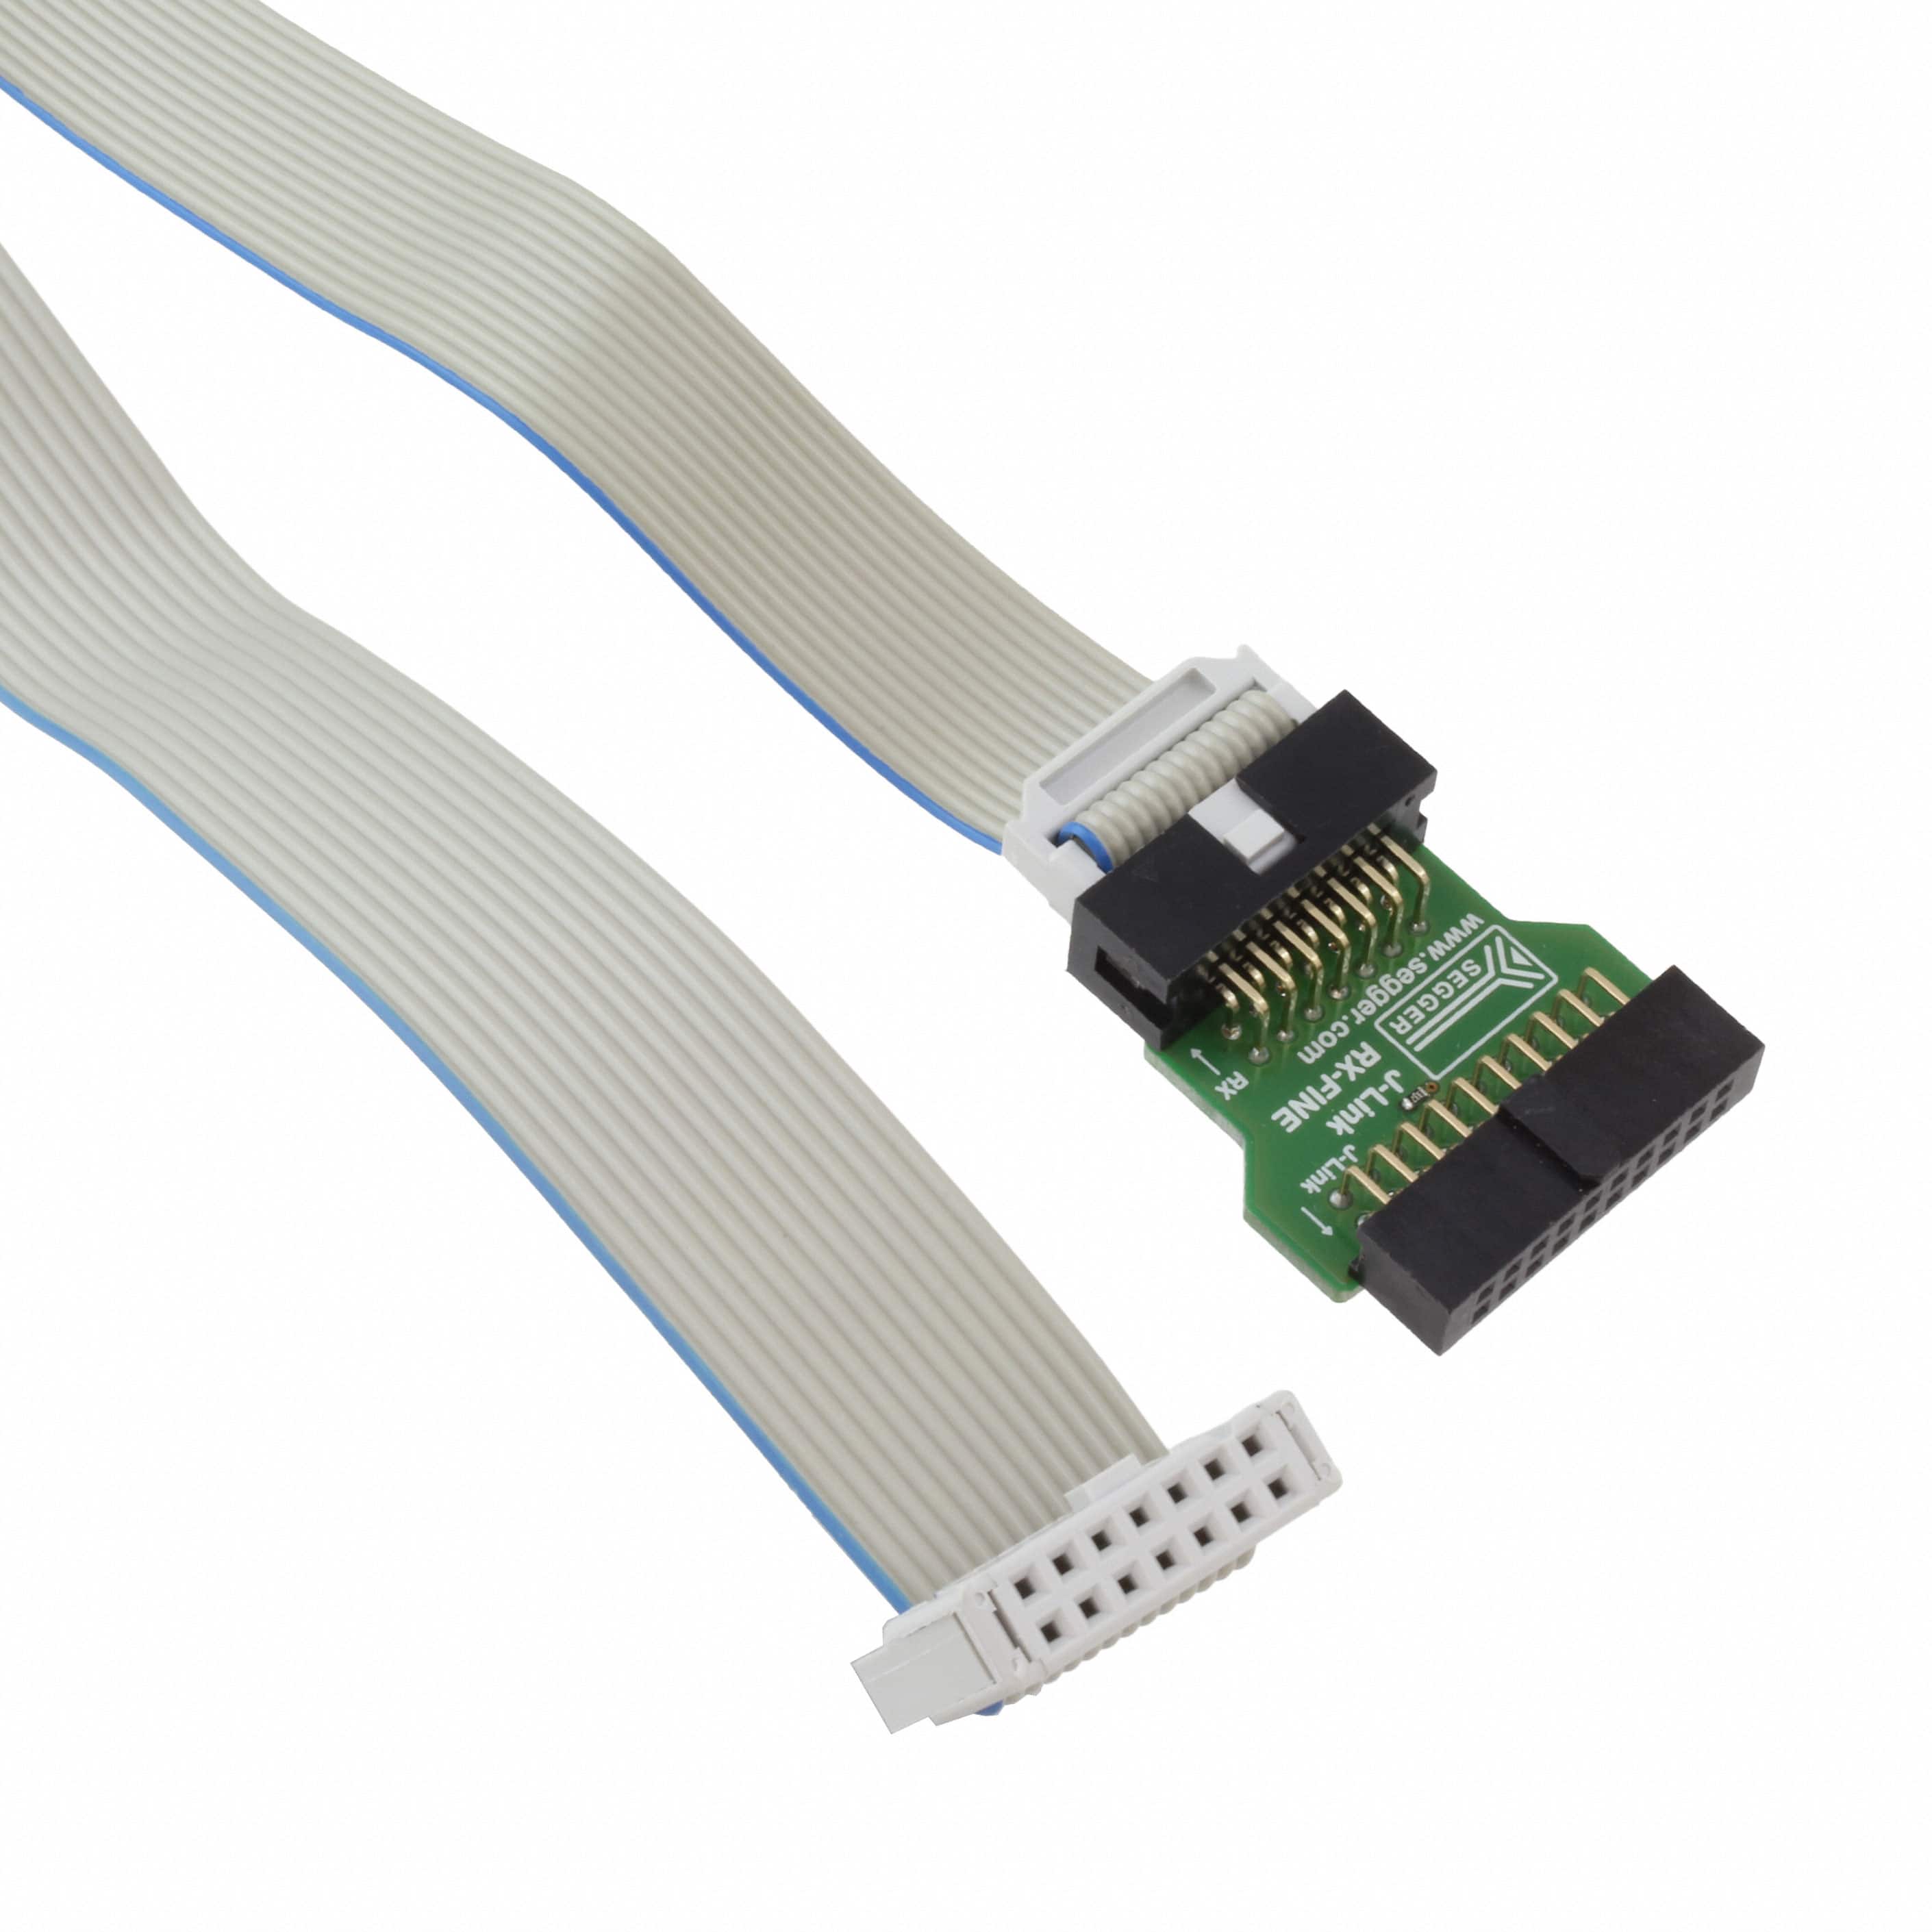 Segger Microcontroller Systems 8.06.10 J-LINK RX FINE ADAPTER